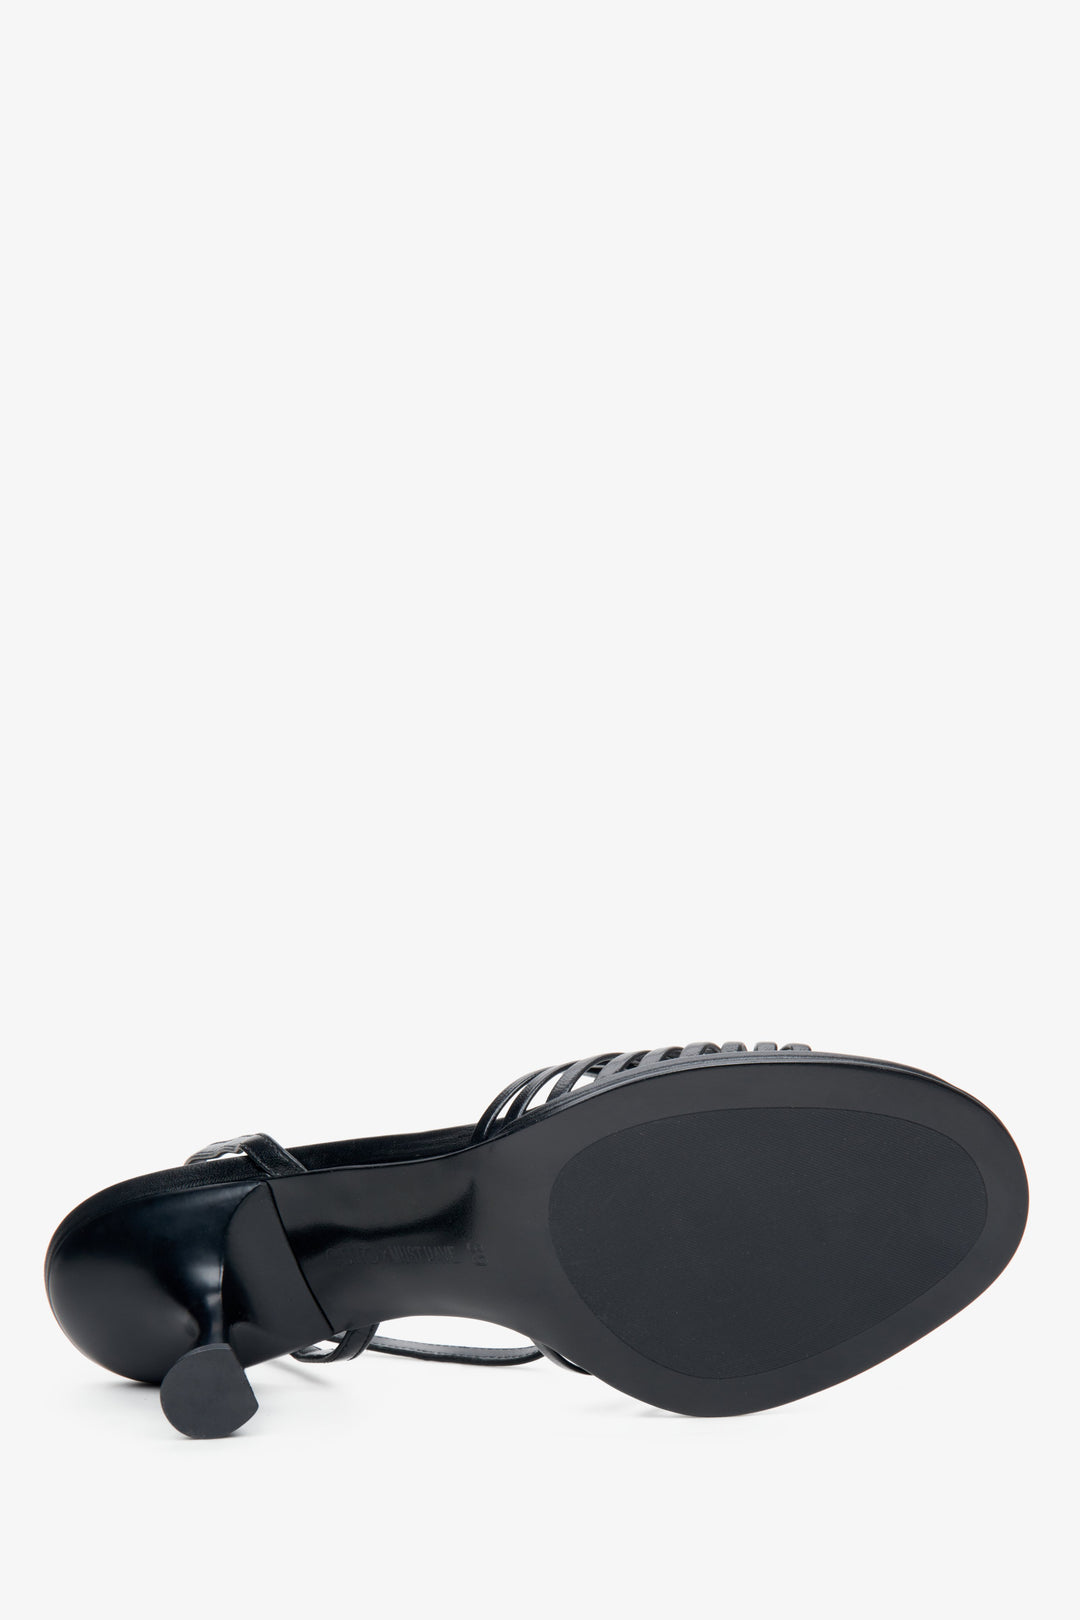 Estro x MustHave women's black leather sandals with heels - close-up on the sole.